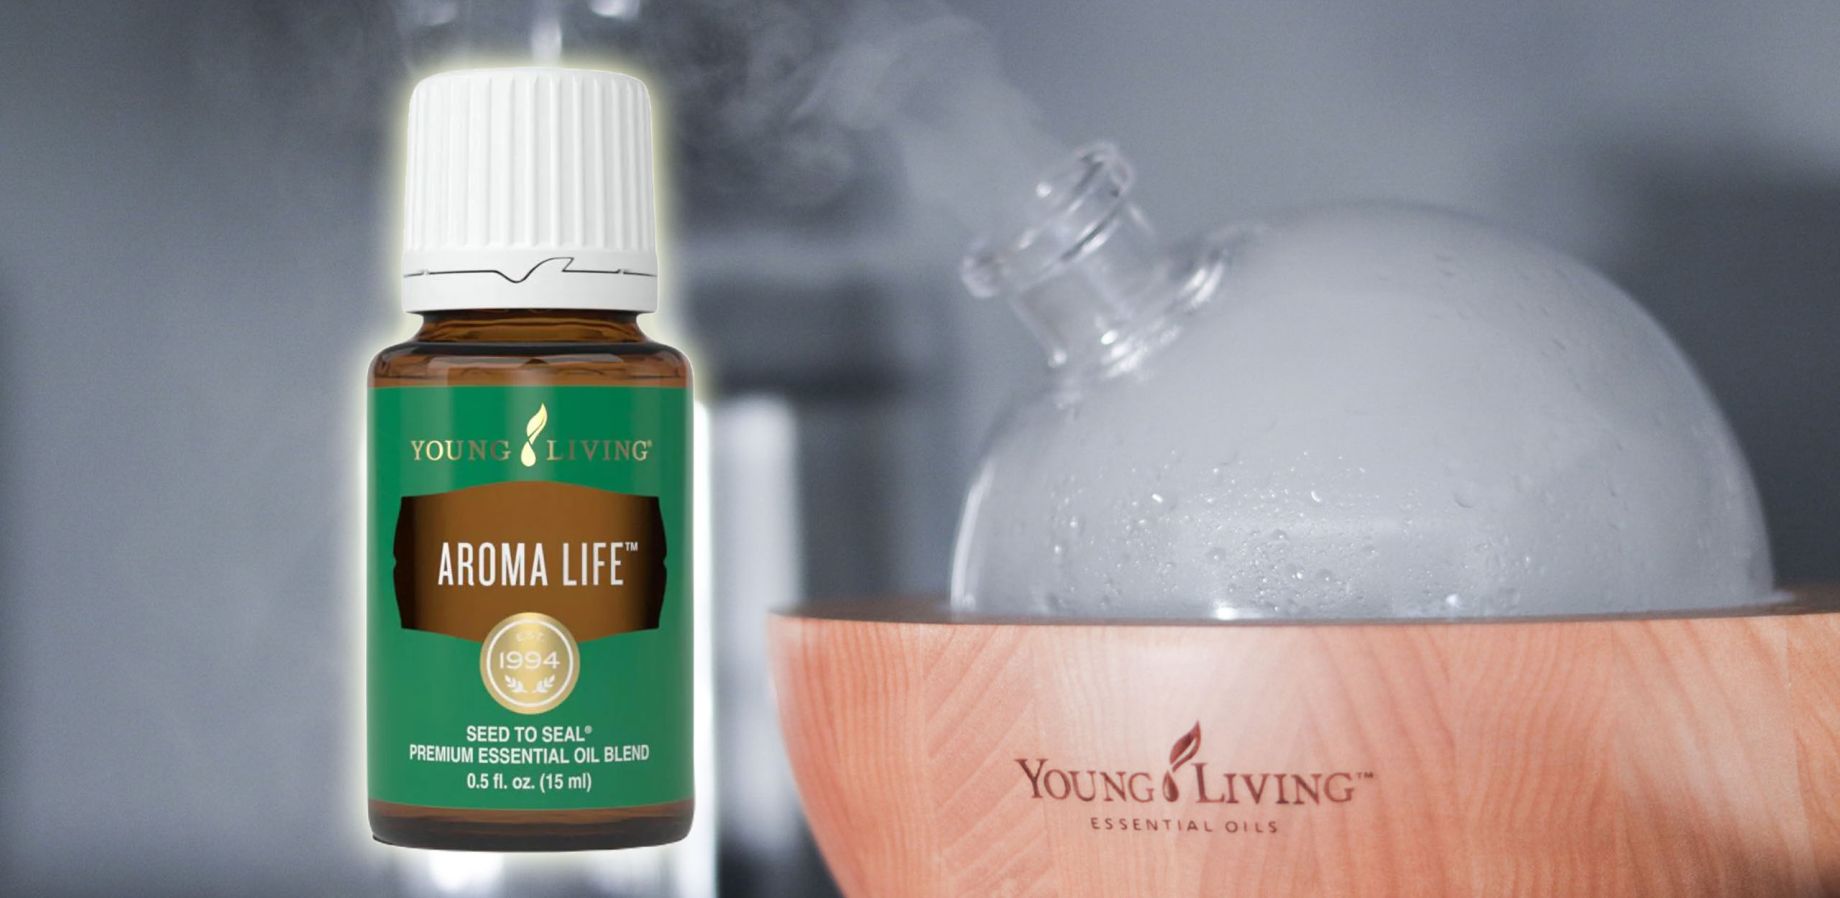 The Story of Aroma Life